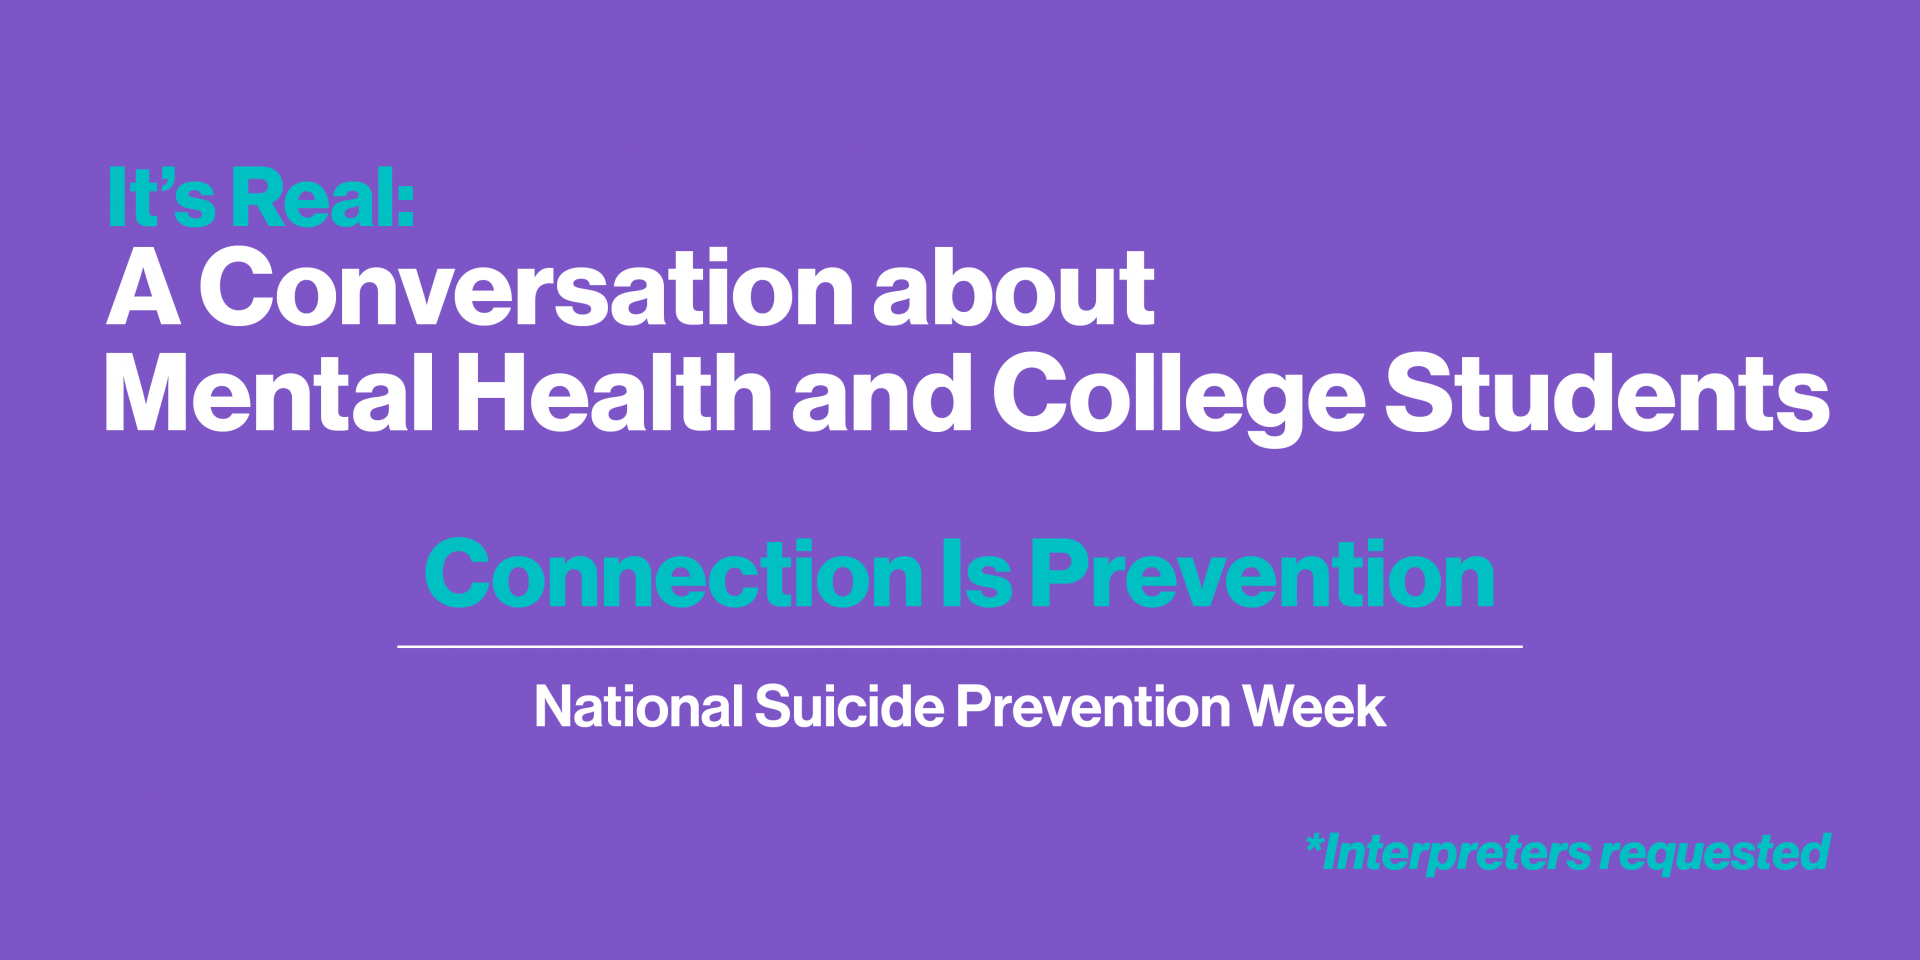 It’s Real: A Conversation about Mental Health and College Students